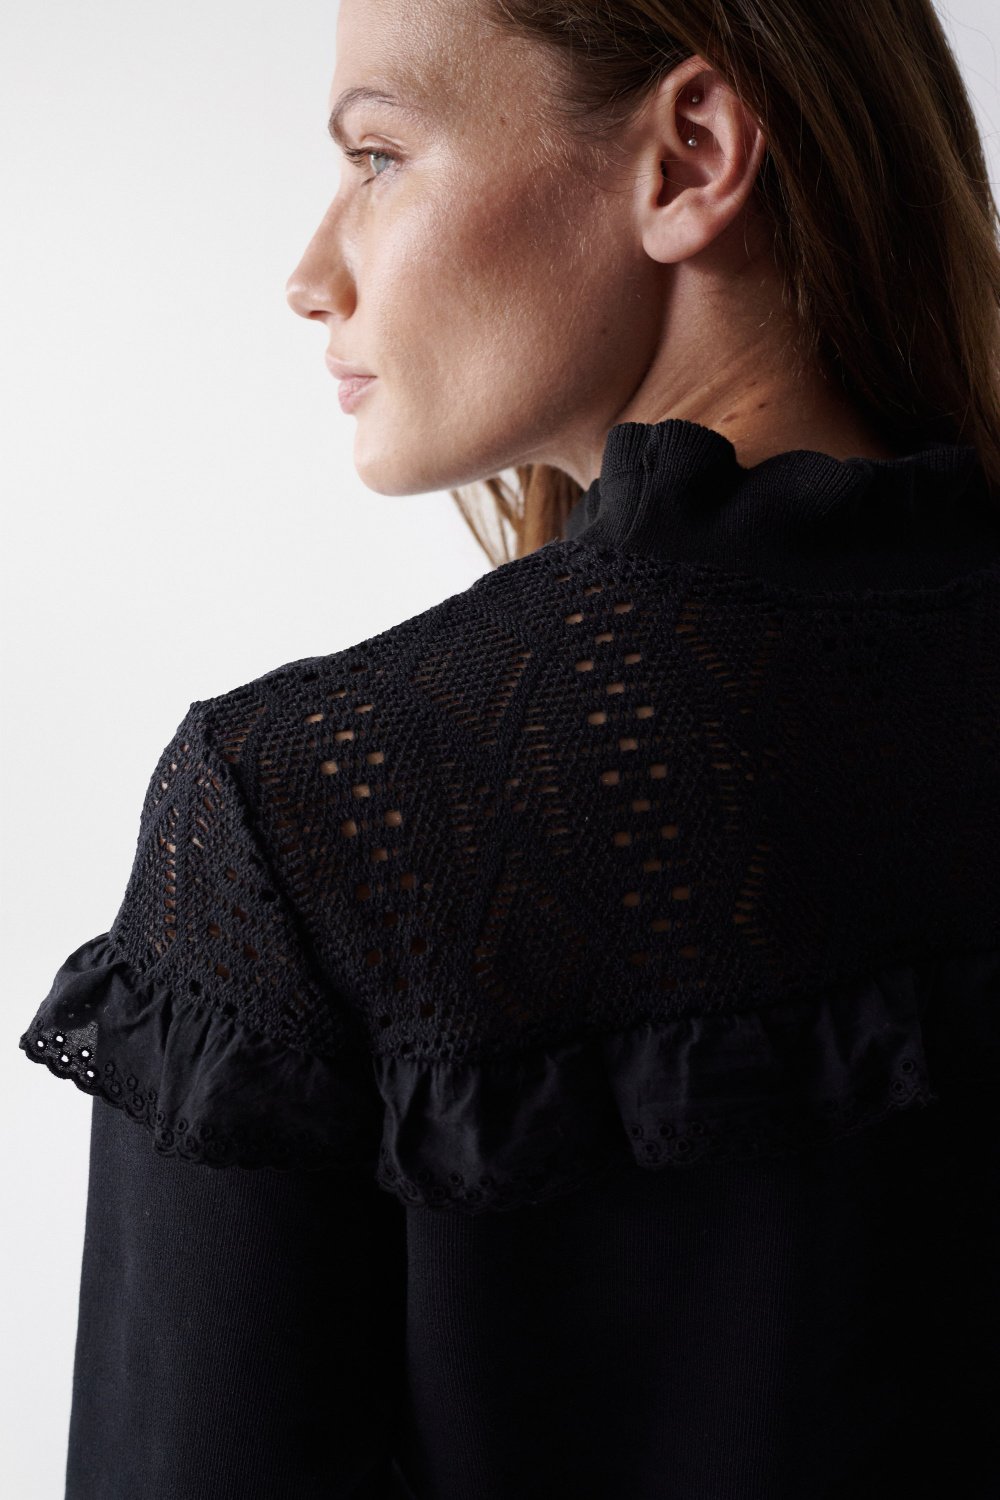 Sweatshirt with lace detail - Salsa